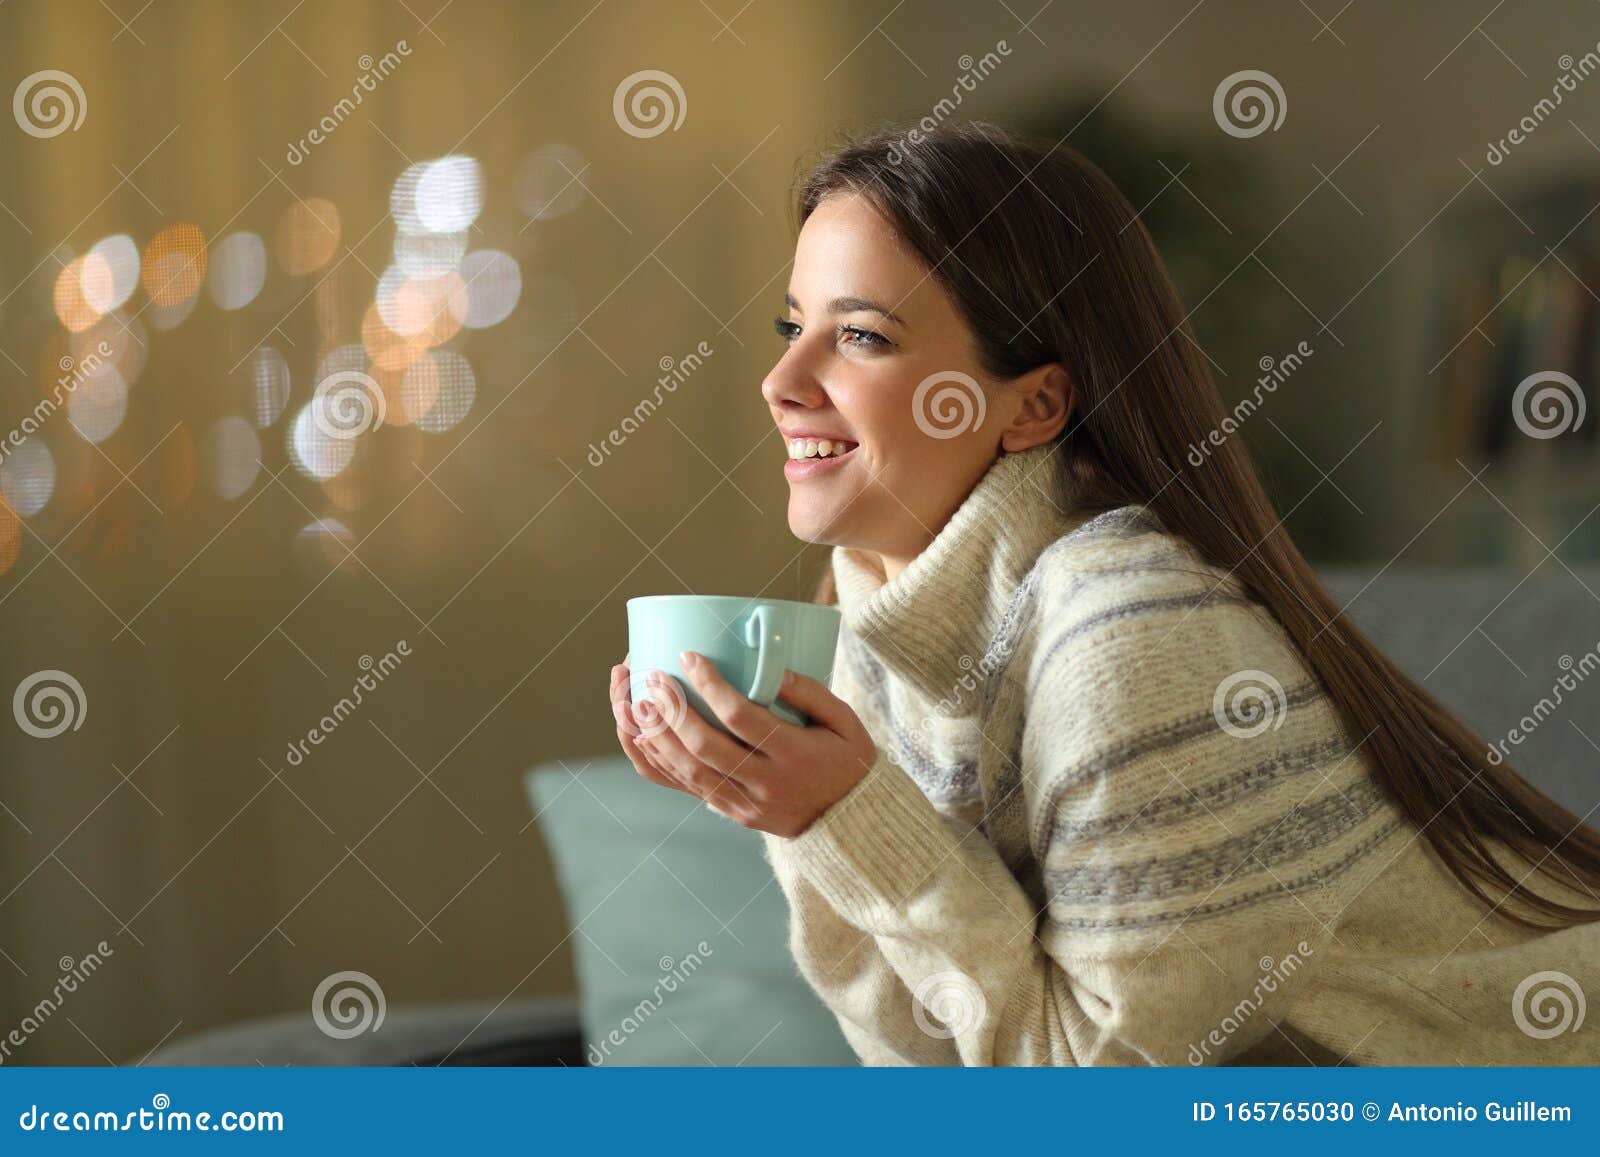 Woman Holding Coffee Cup · Free Stock Photo